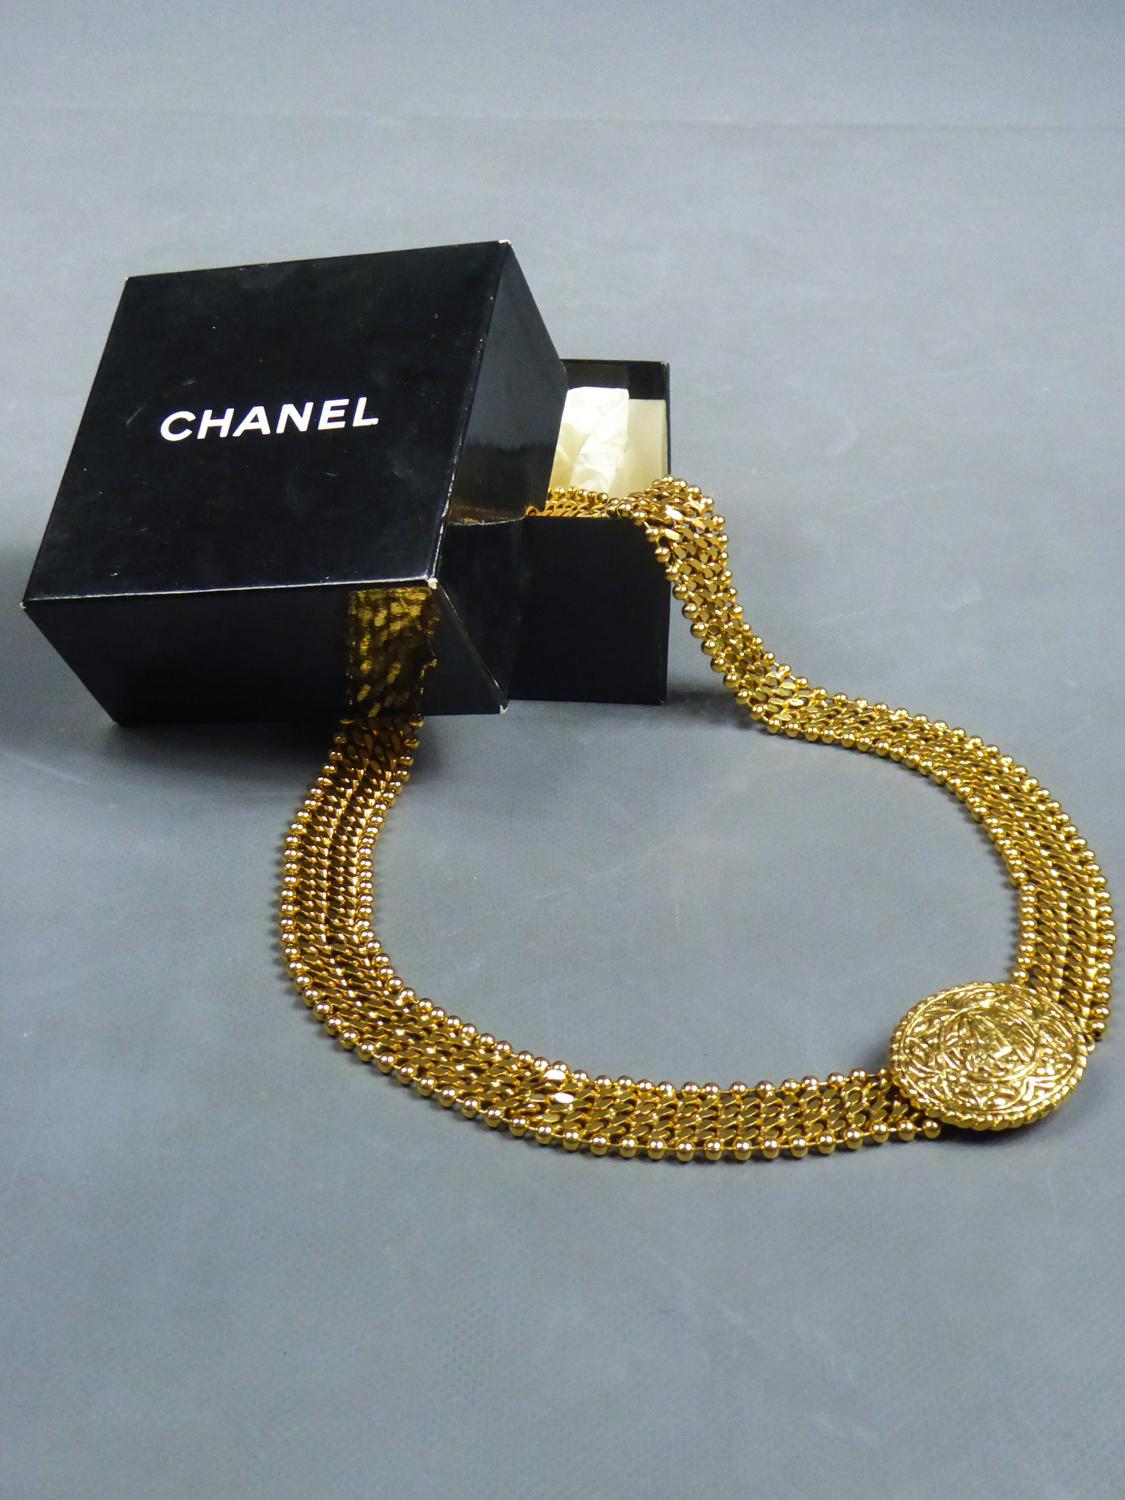 Circa 1970/1980
France

Beautiful evening belt in gilded metal branded by Maison Chanel by the famous designer Robert Goossens and numbered 6020. Labelled C Chanel Made in France on the back of the medallion. Assembly of two stretchable links chains